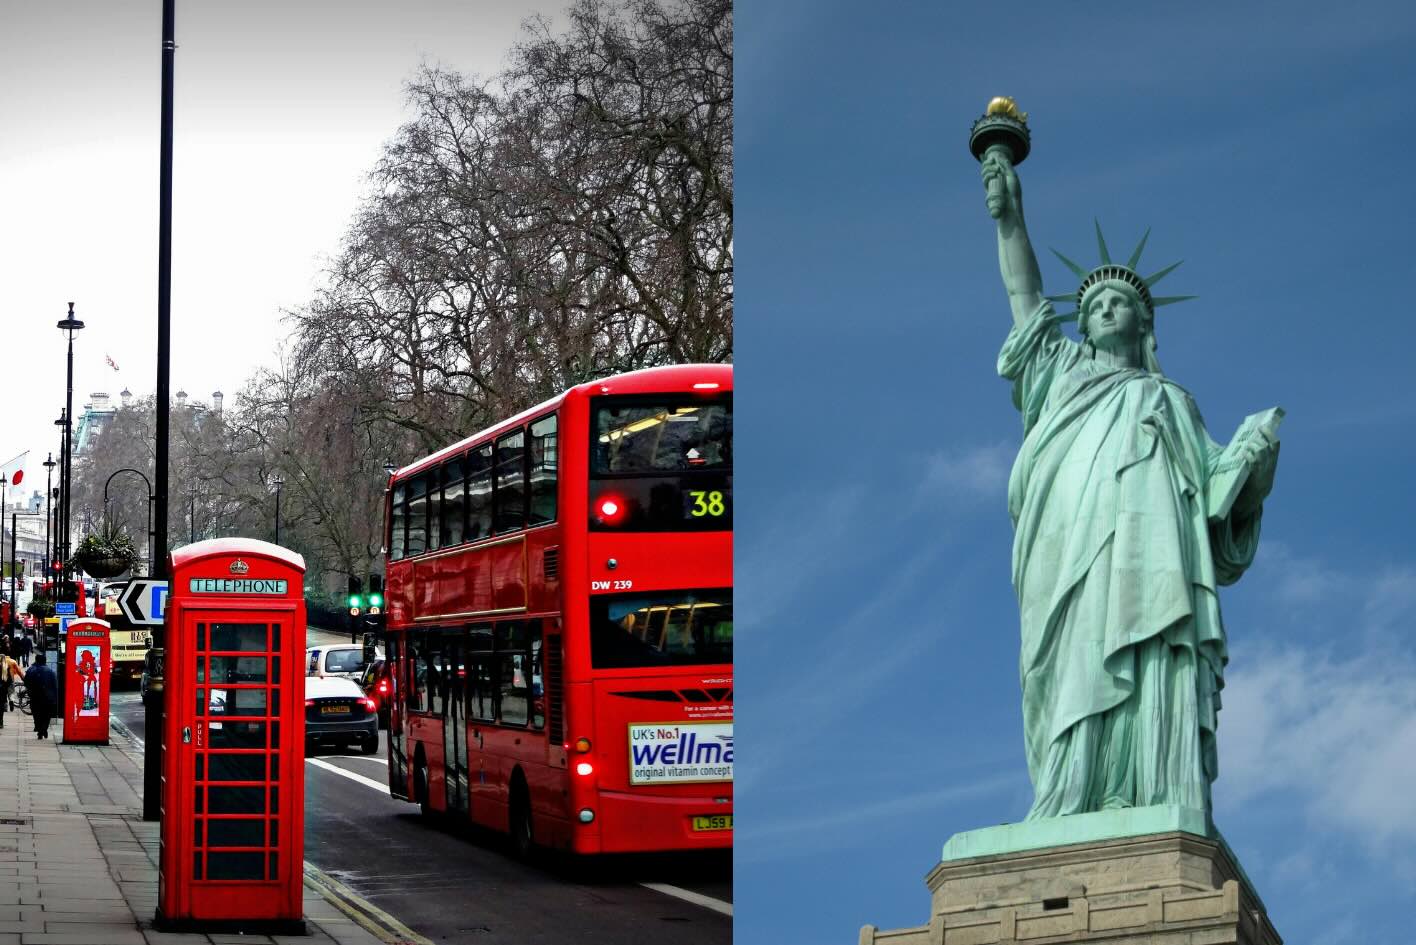 A photo showing a UK bus and the statue of Independence